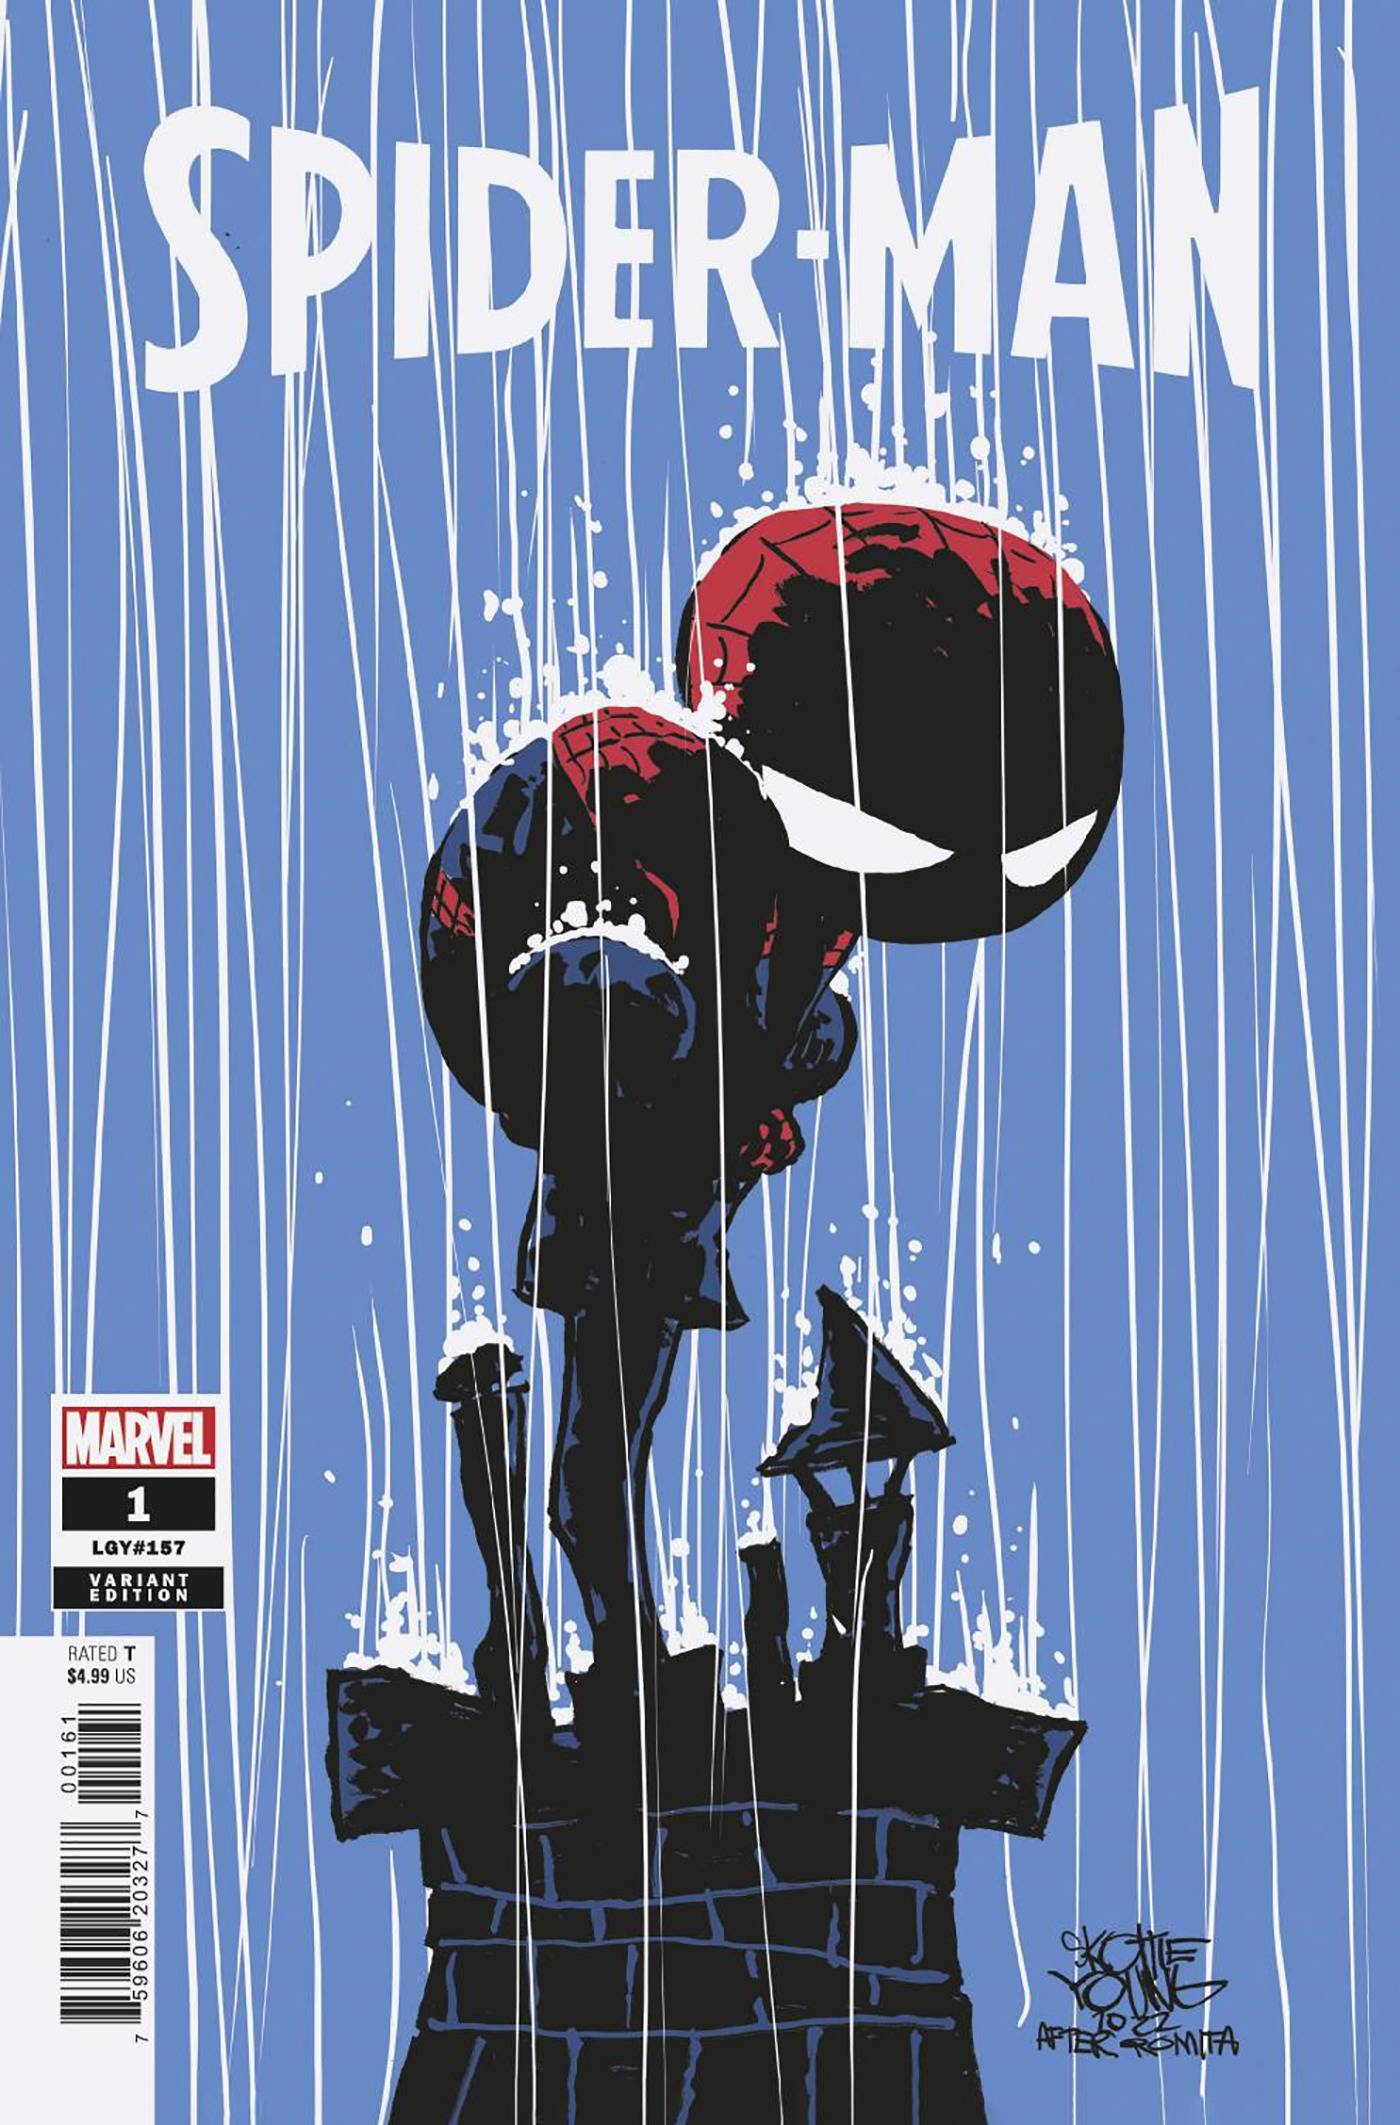 10/05/2022 SPIDER-MAN #1 YOUNG VARIANT